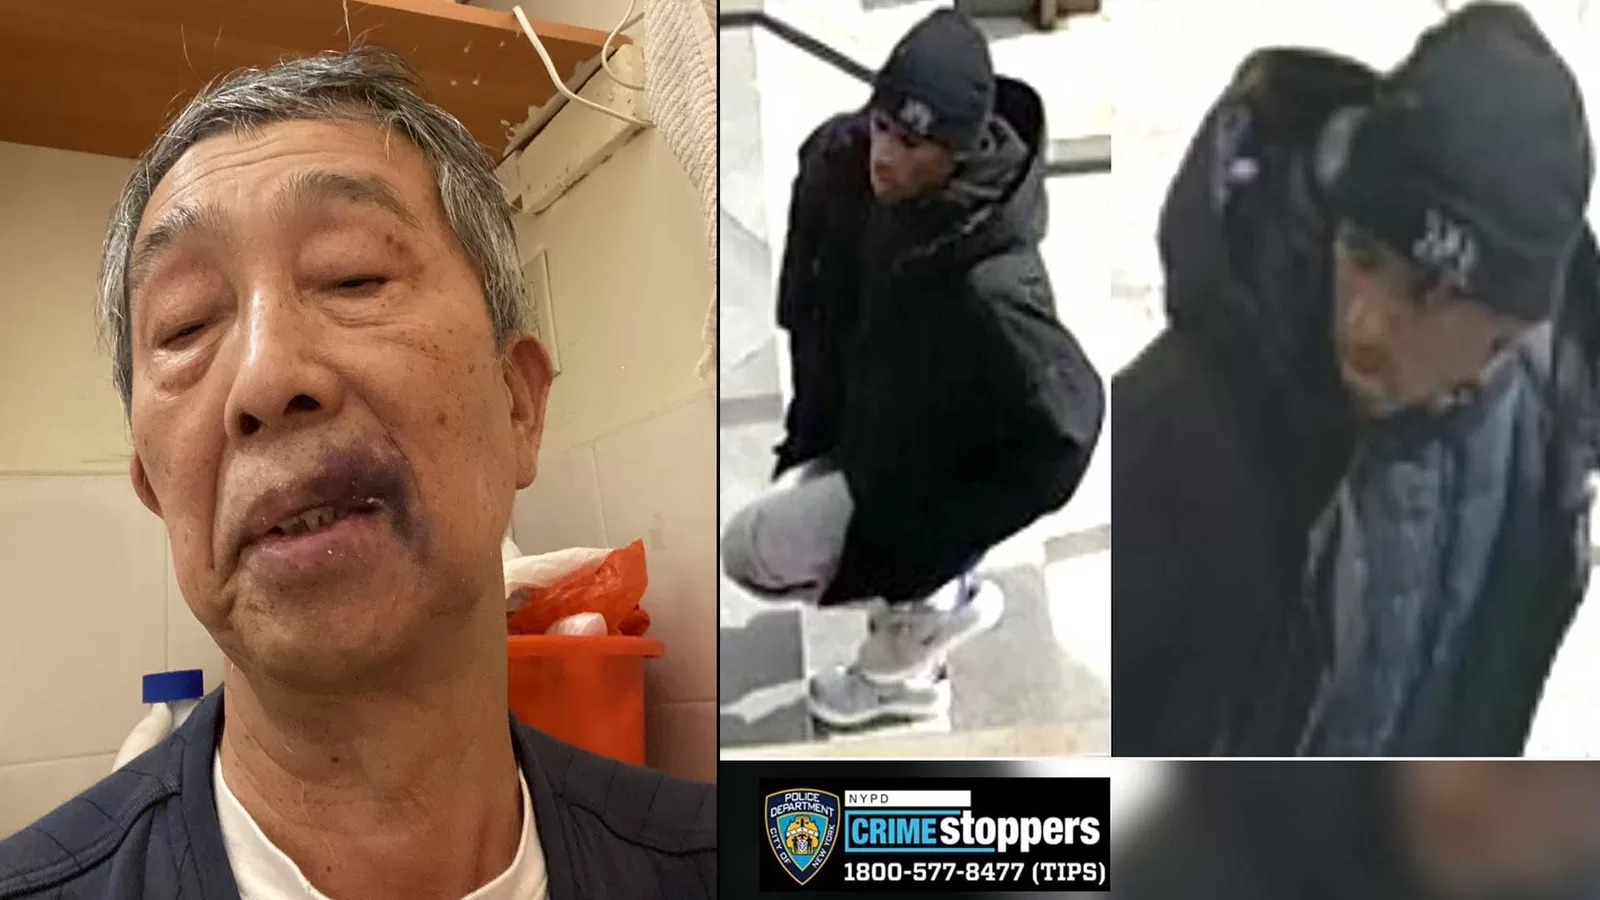 NYC crime: 72-year-old man speaks out after random attack on street in Elmhurst, Queens